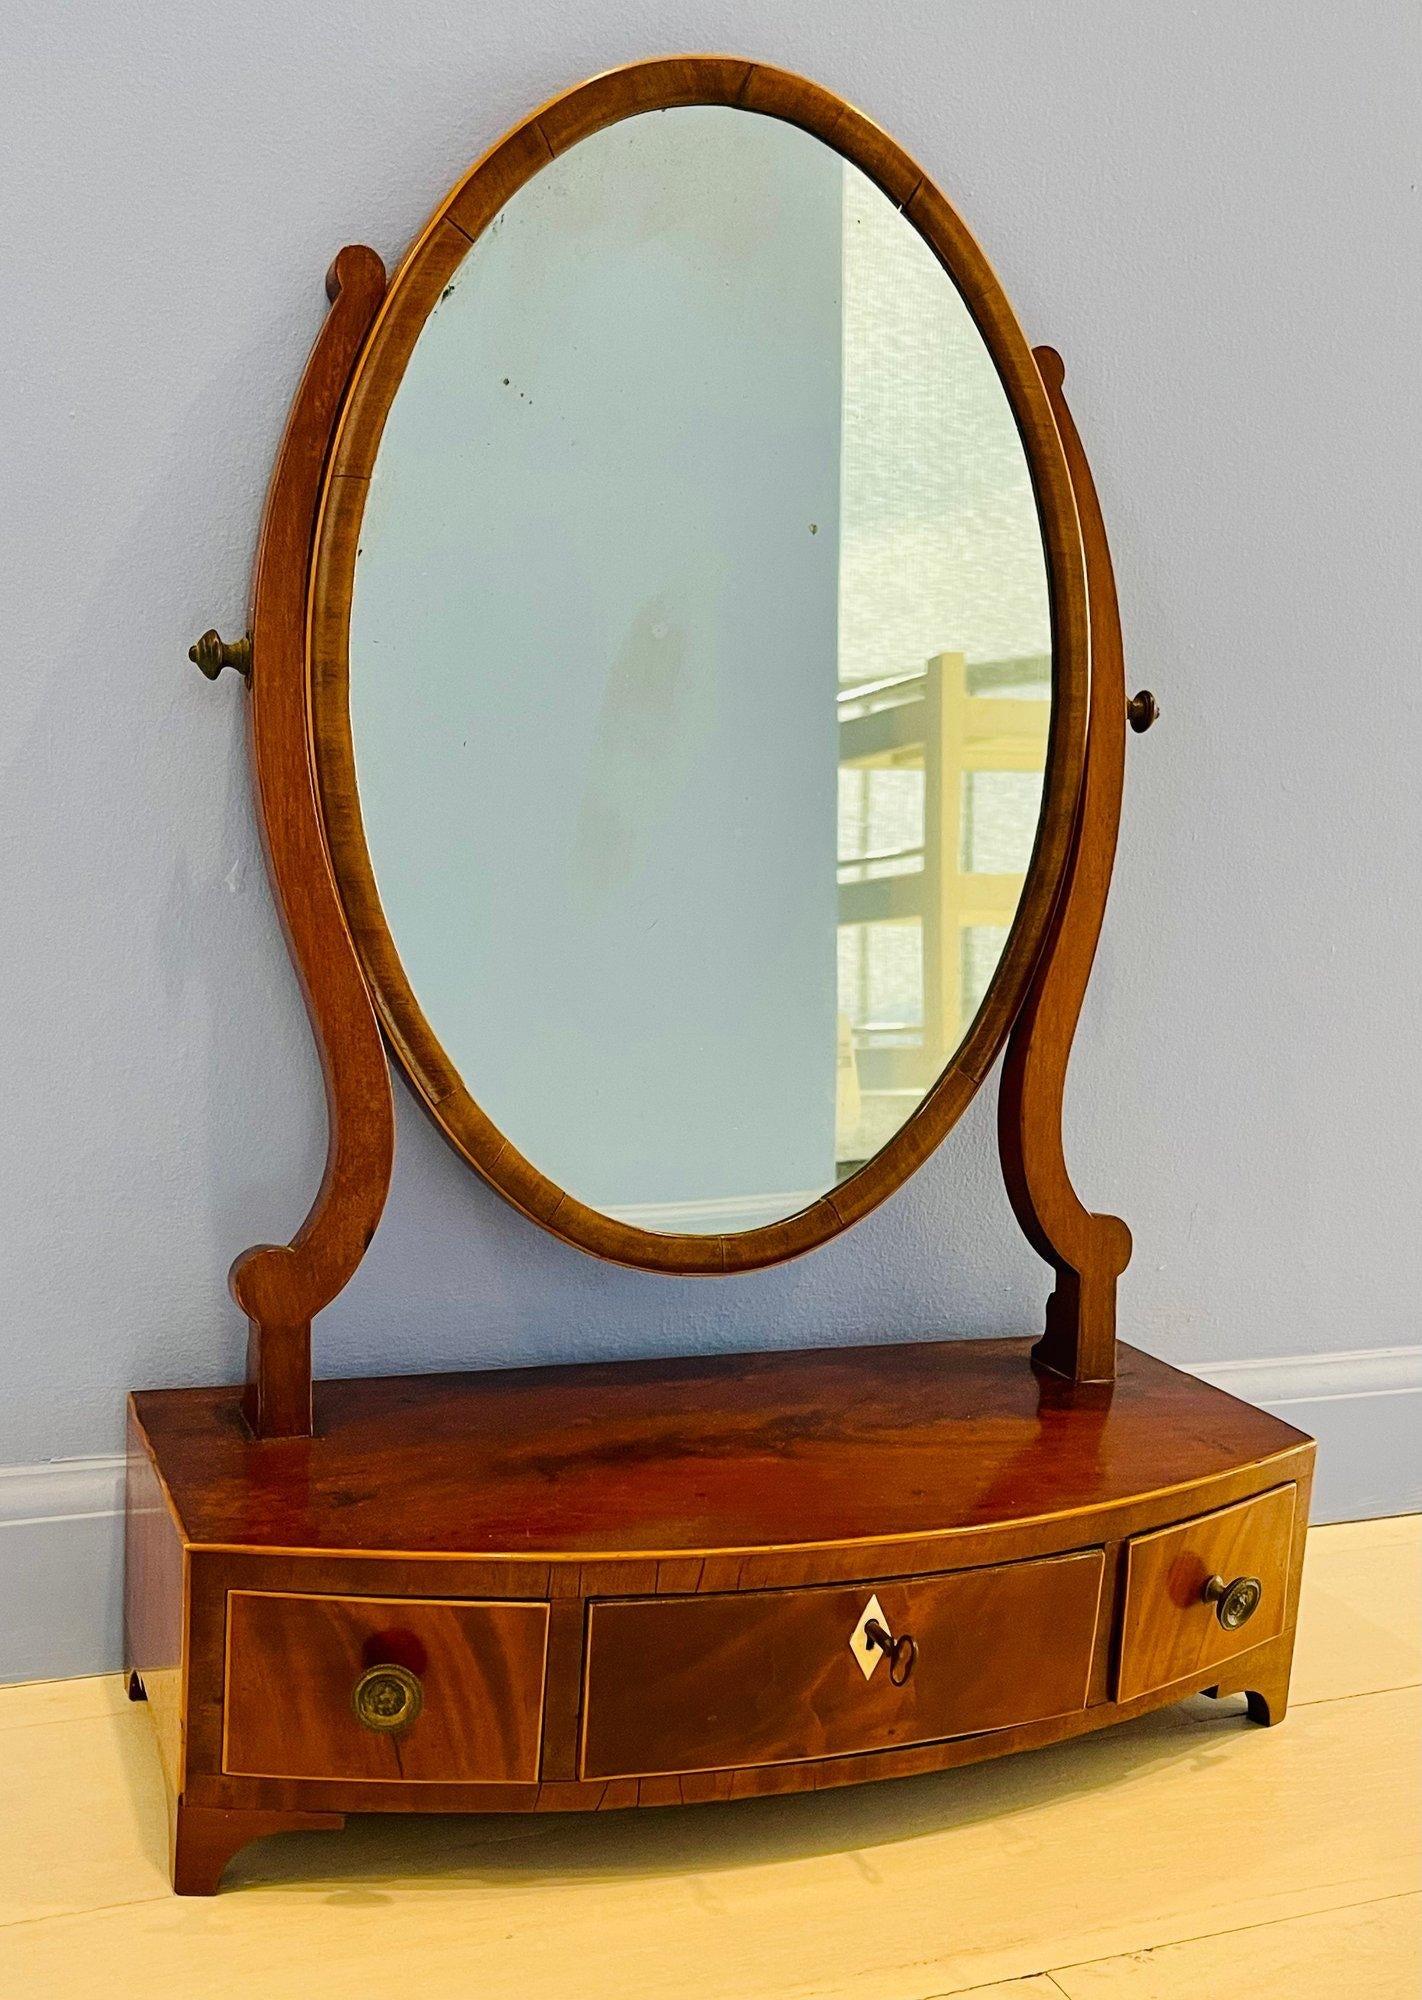 A rare and very good quality Georgian Mahogany dressing and shaving tilting oval mounted mirror. Above a bow front case with 3 drawers raised on splay feet. Brass handles & keyhole escutcheon. Key is included.

24